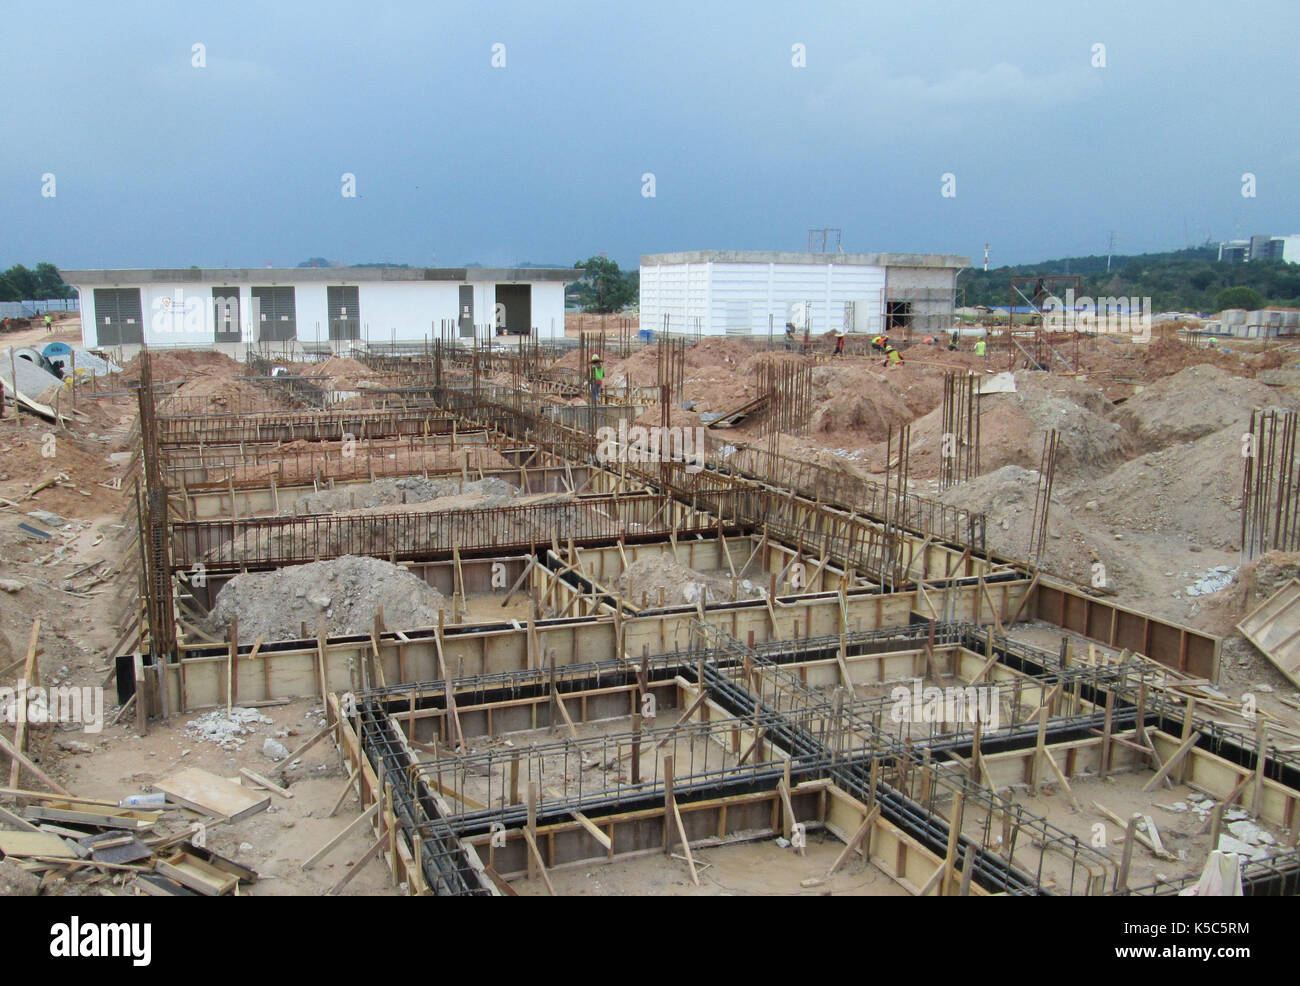 Building ground beam under construction. Made from steel reinforced concrete and the mold made from timber and plywood. Constructed by workers. Stock Photo